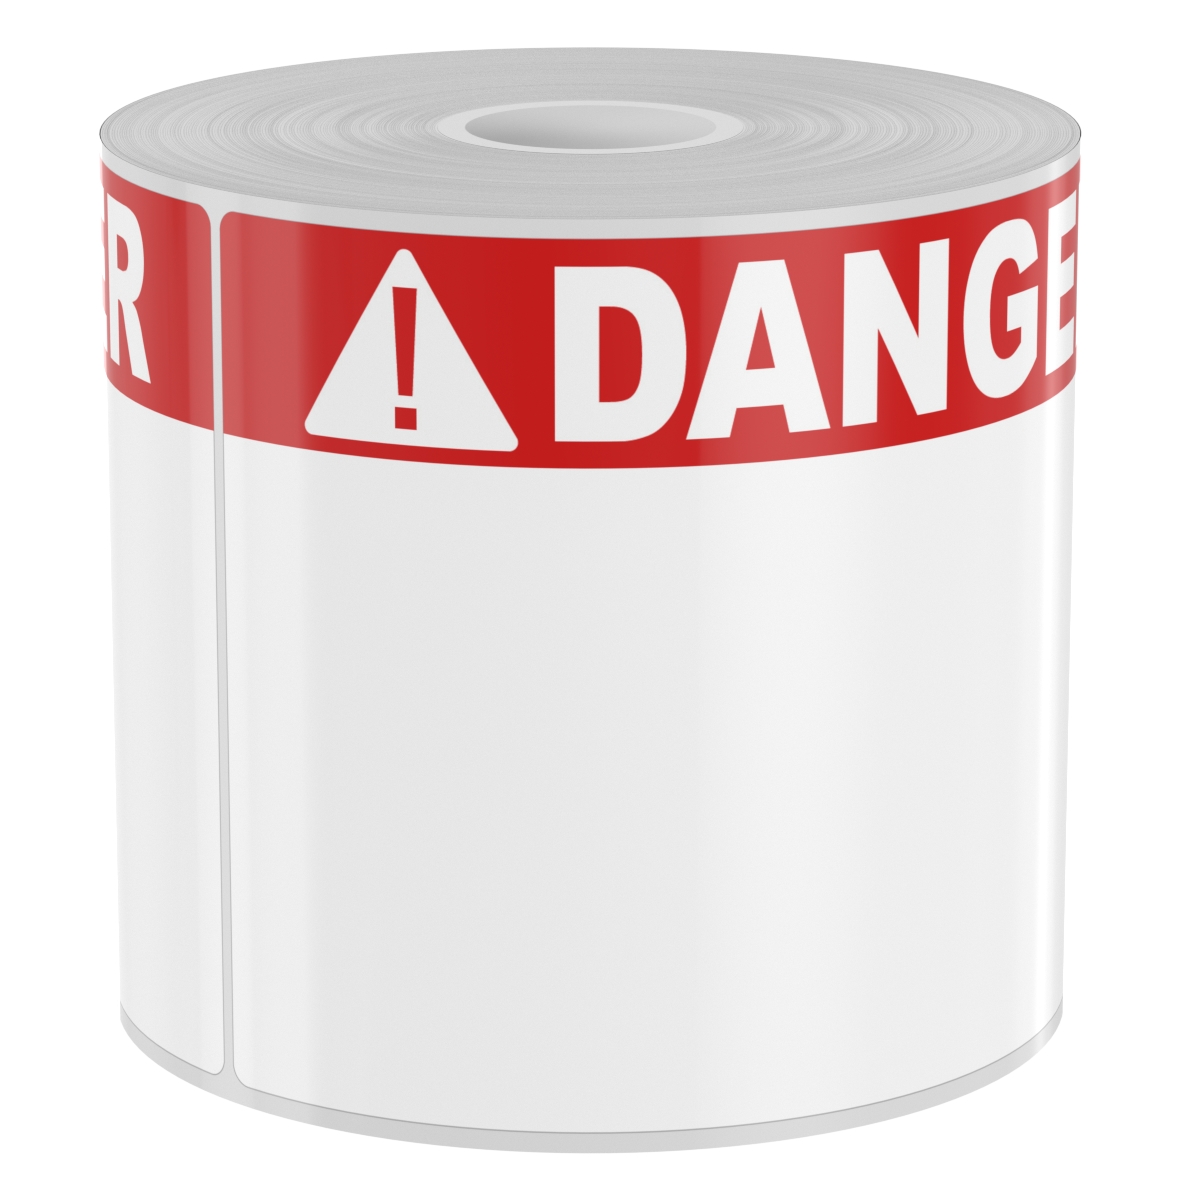 Detail view for 250 4" x 6" Arc Flash Labels White Danger on Red Band